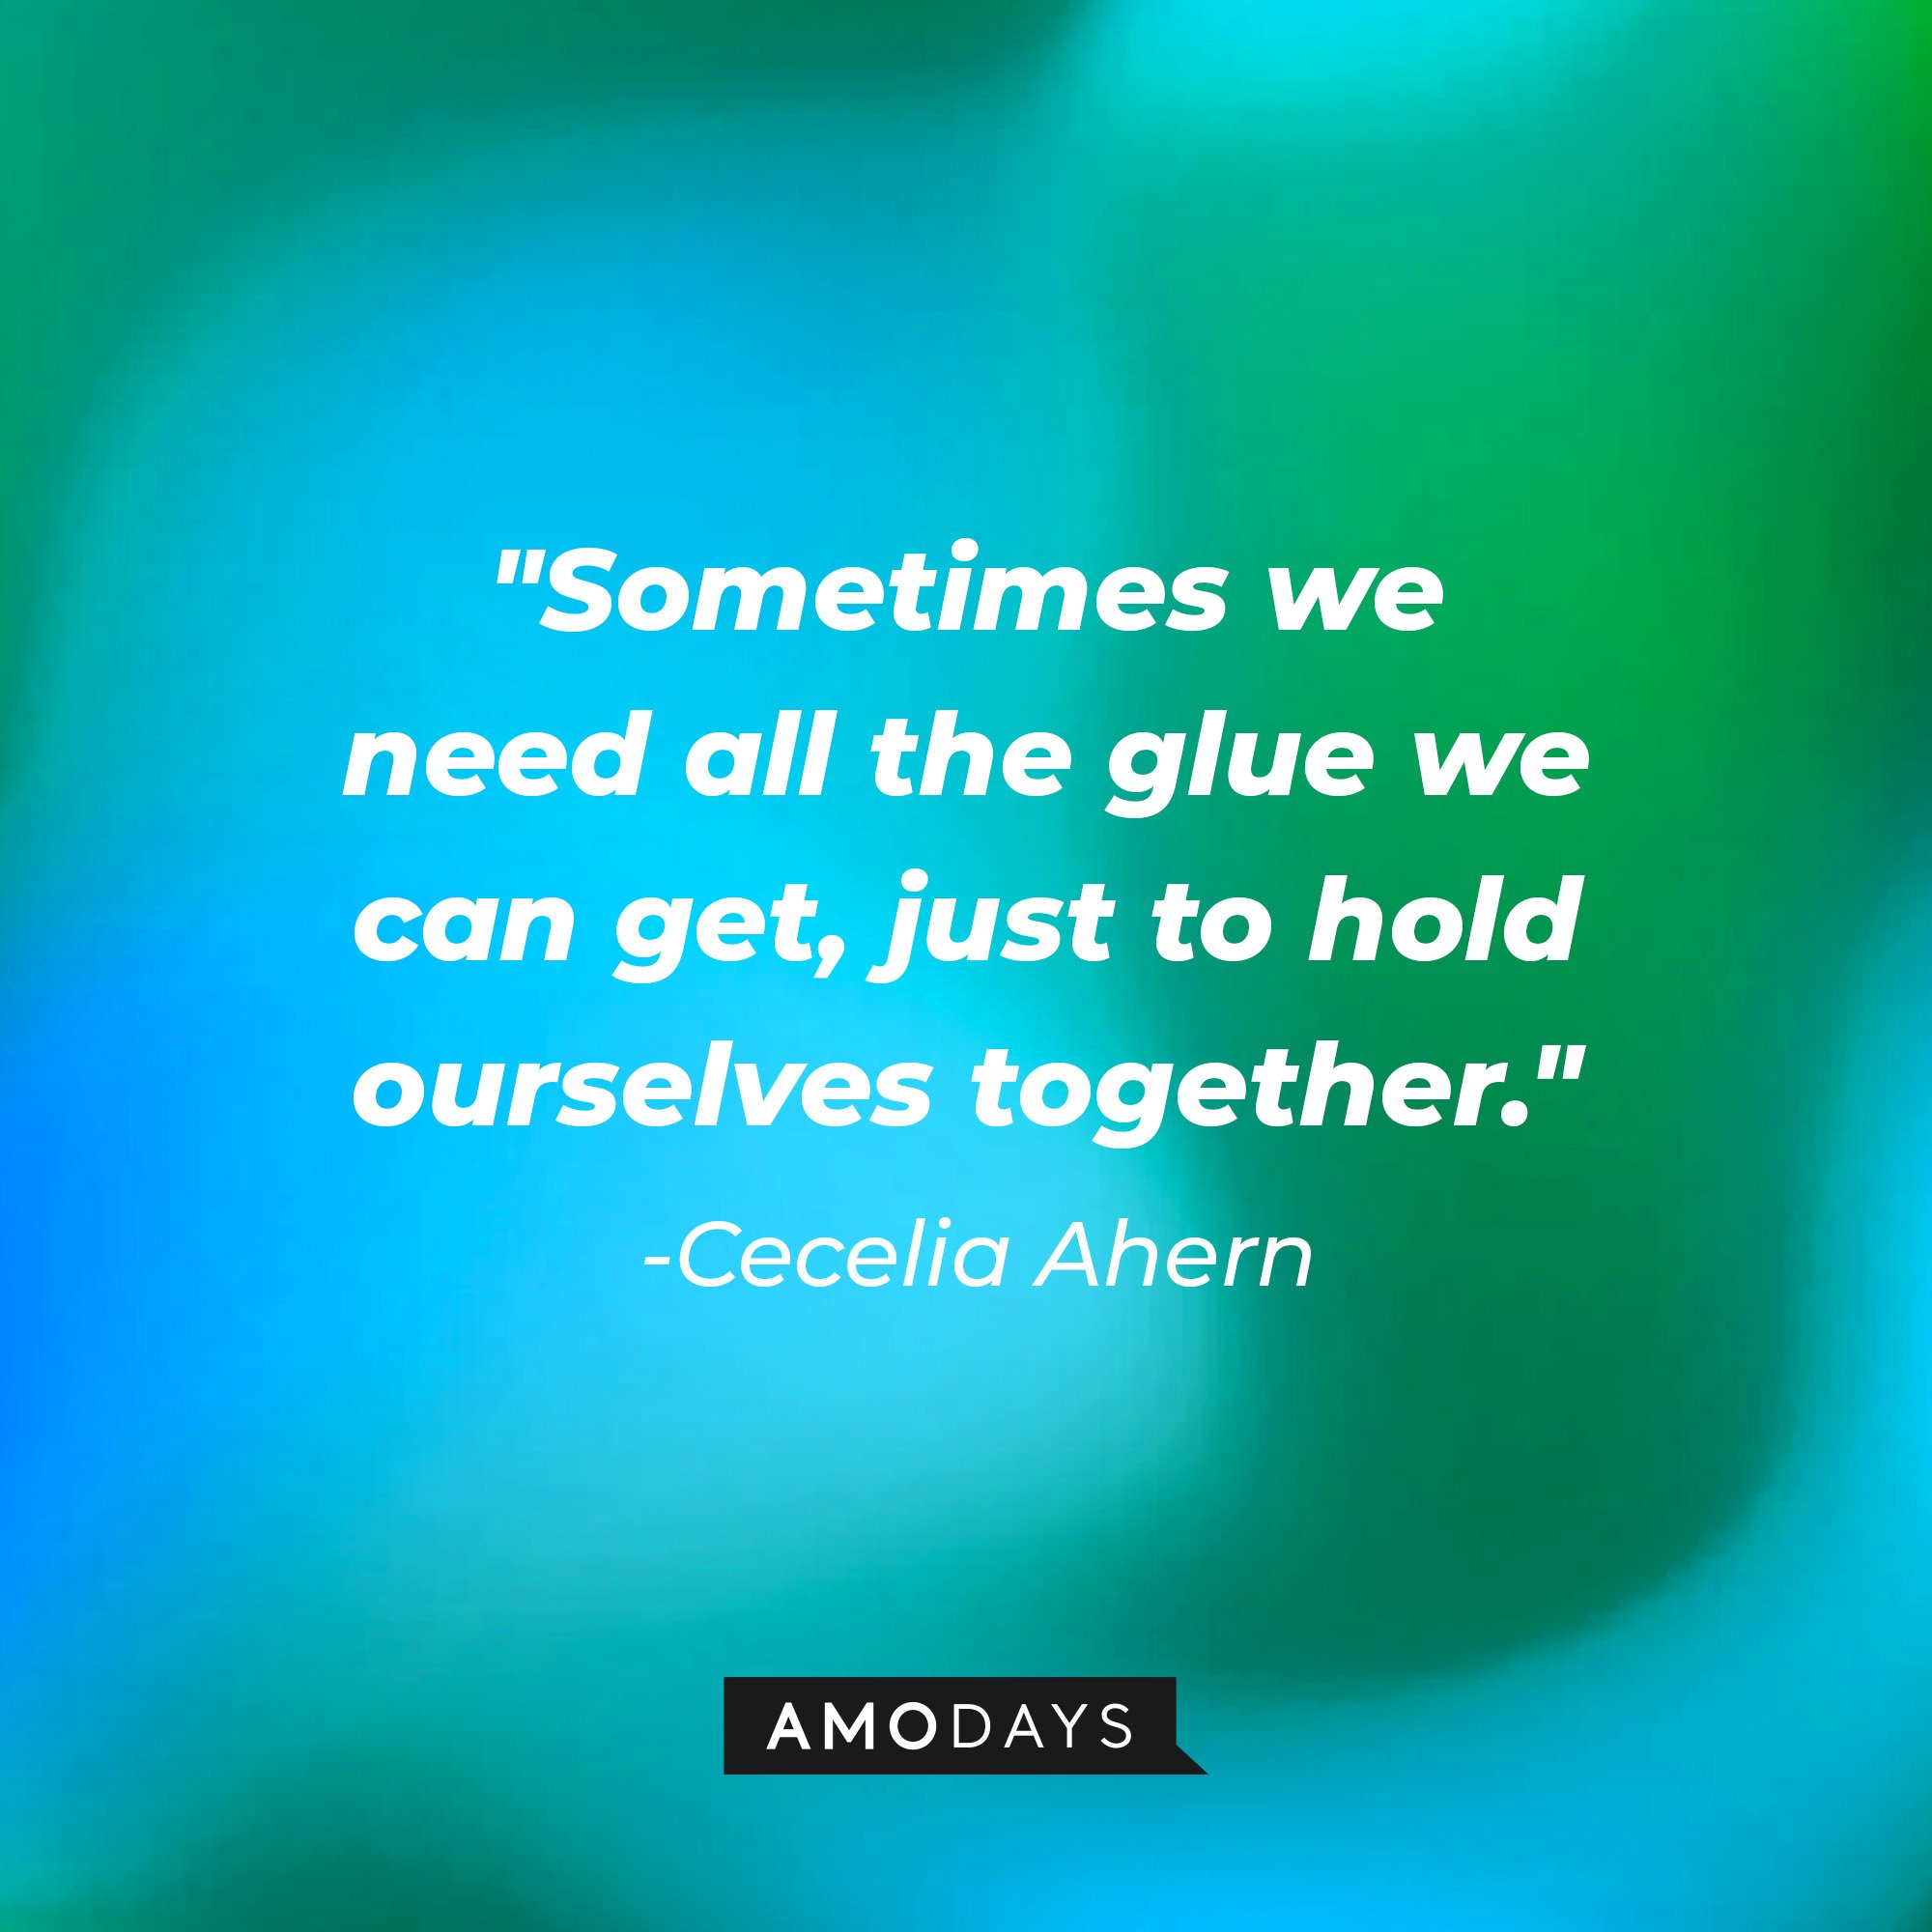 Cecelia Aherns' quote: "Sometimes we need all the glue we can get, just to hold ourselves together." | Image: AmoDays